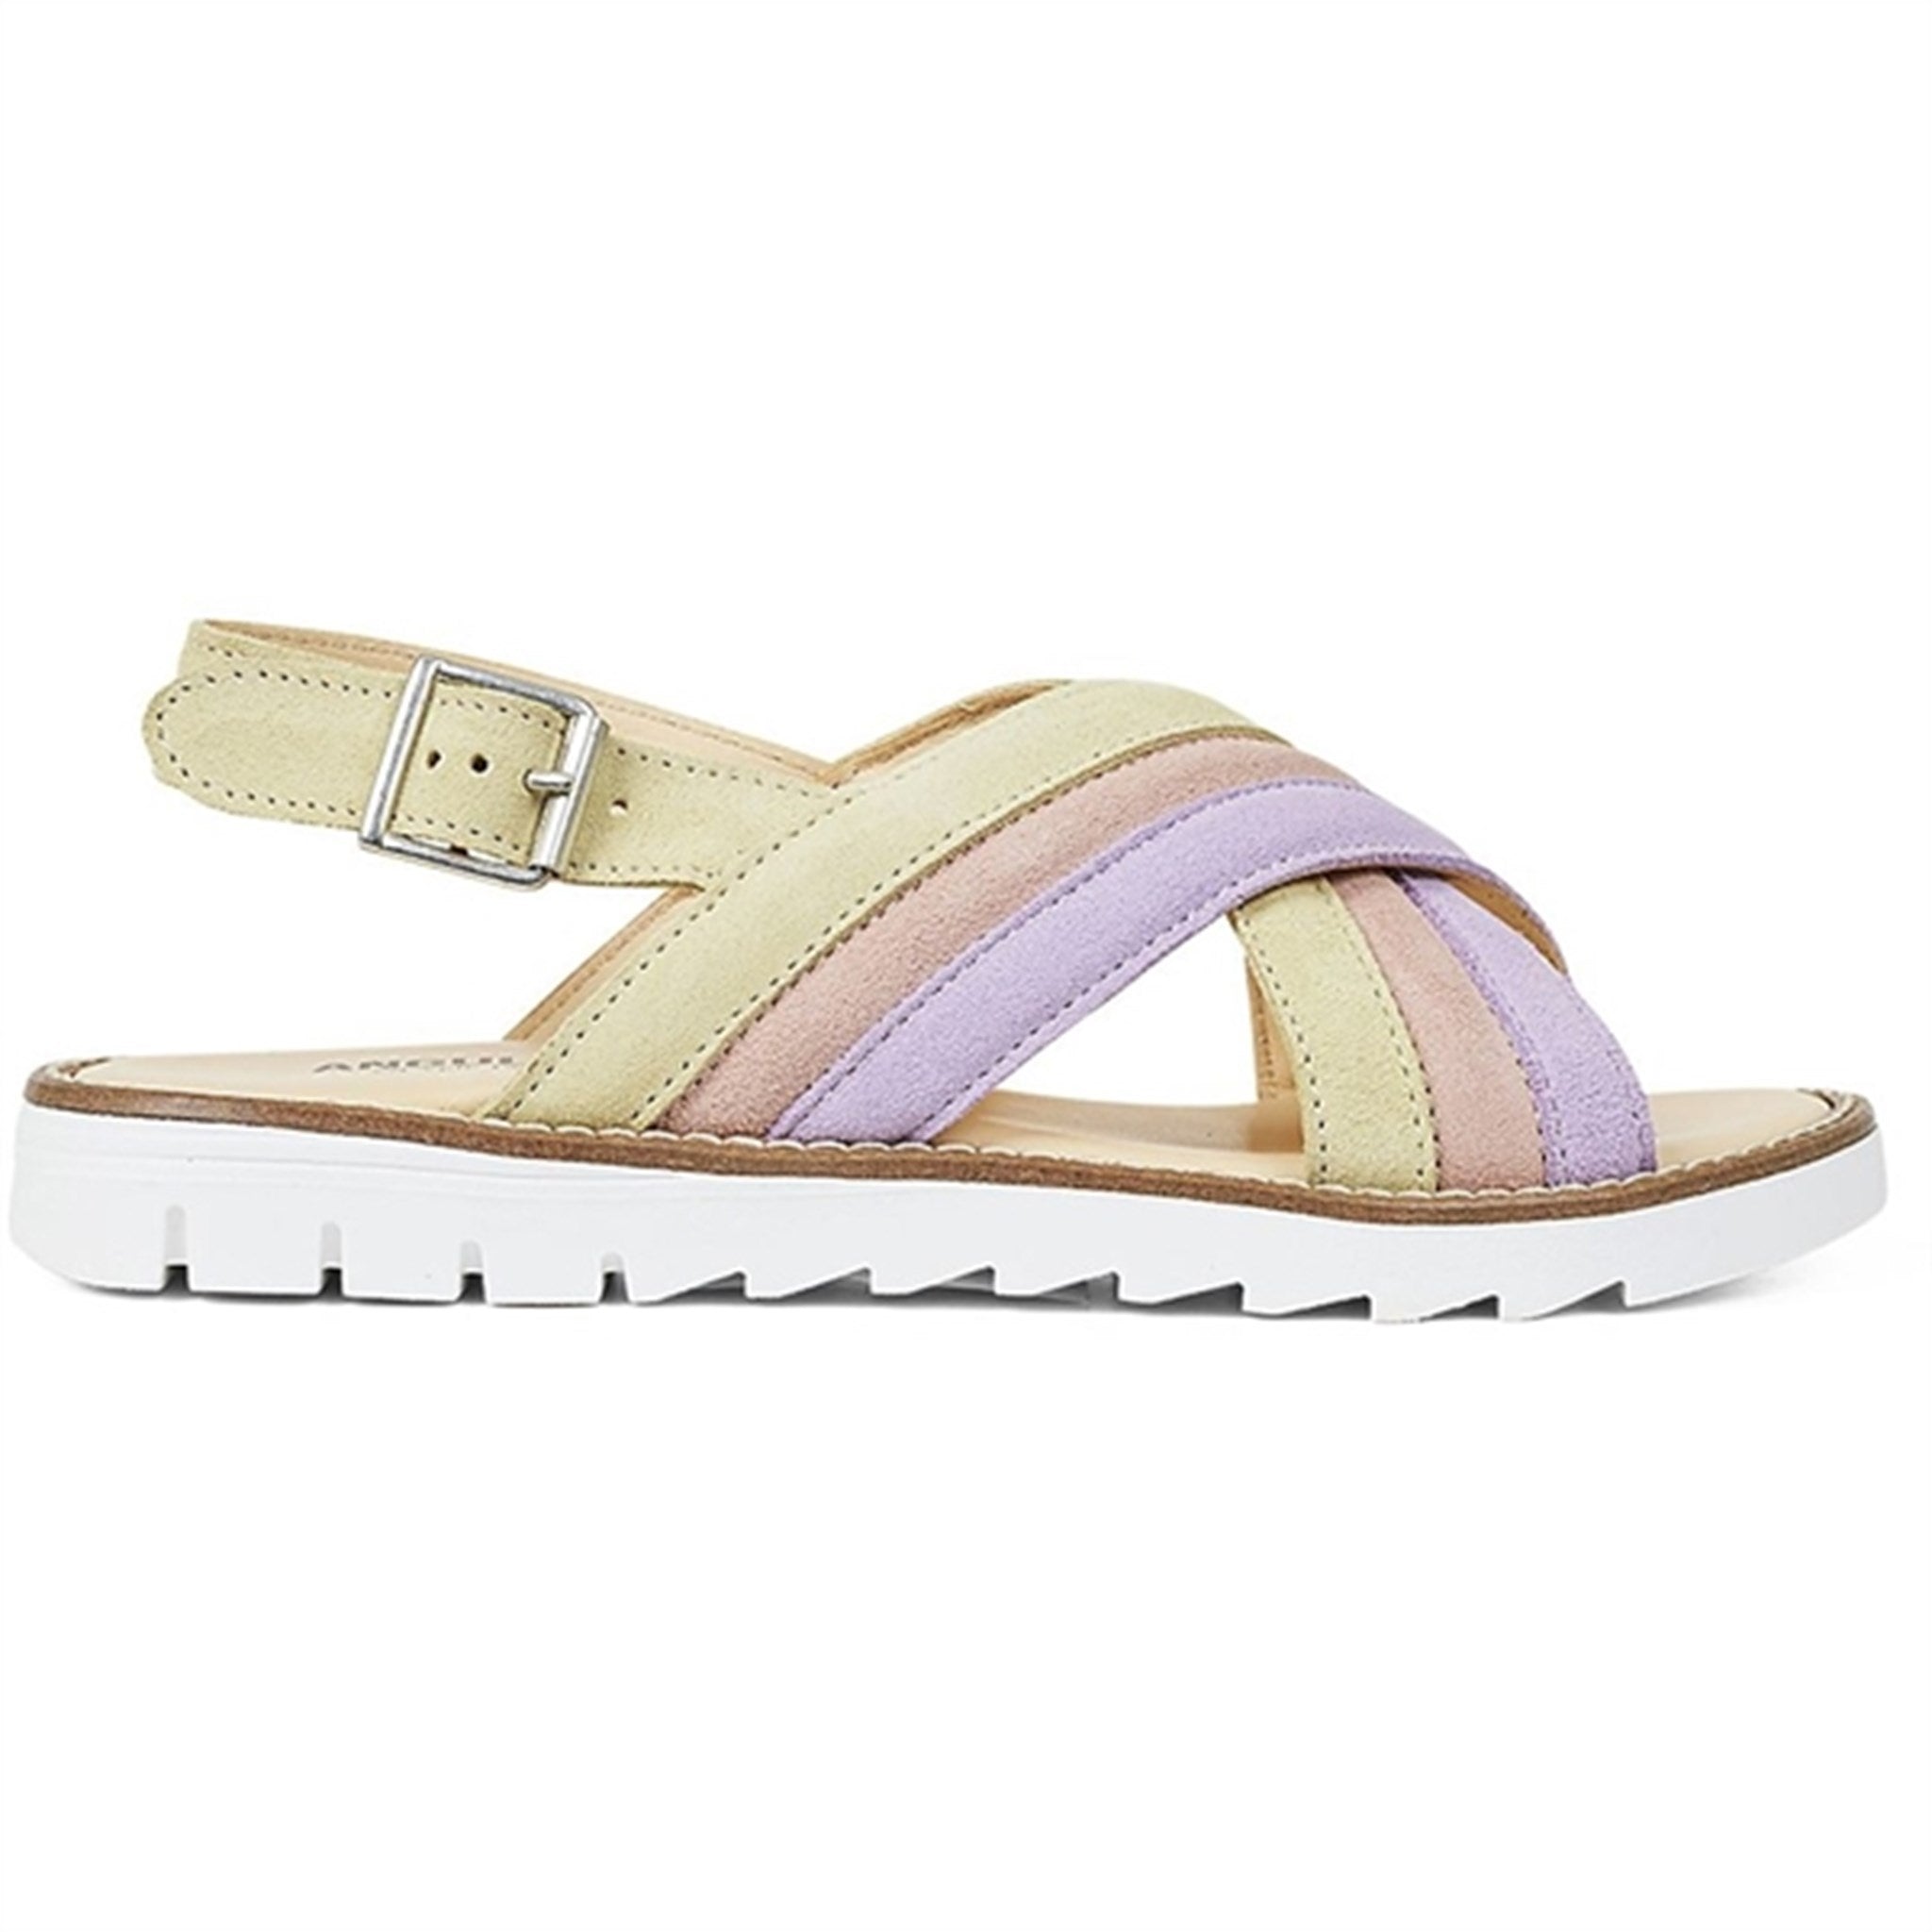 Angulus Sandal W. Open Toe And Buckle Lilac/Peach/Light Yellow 2